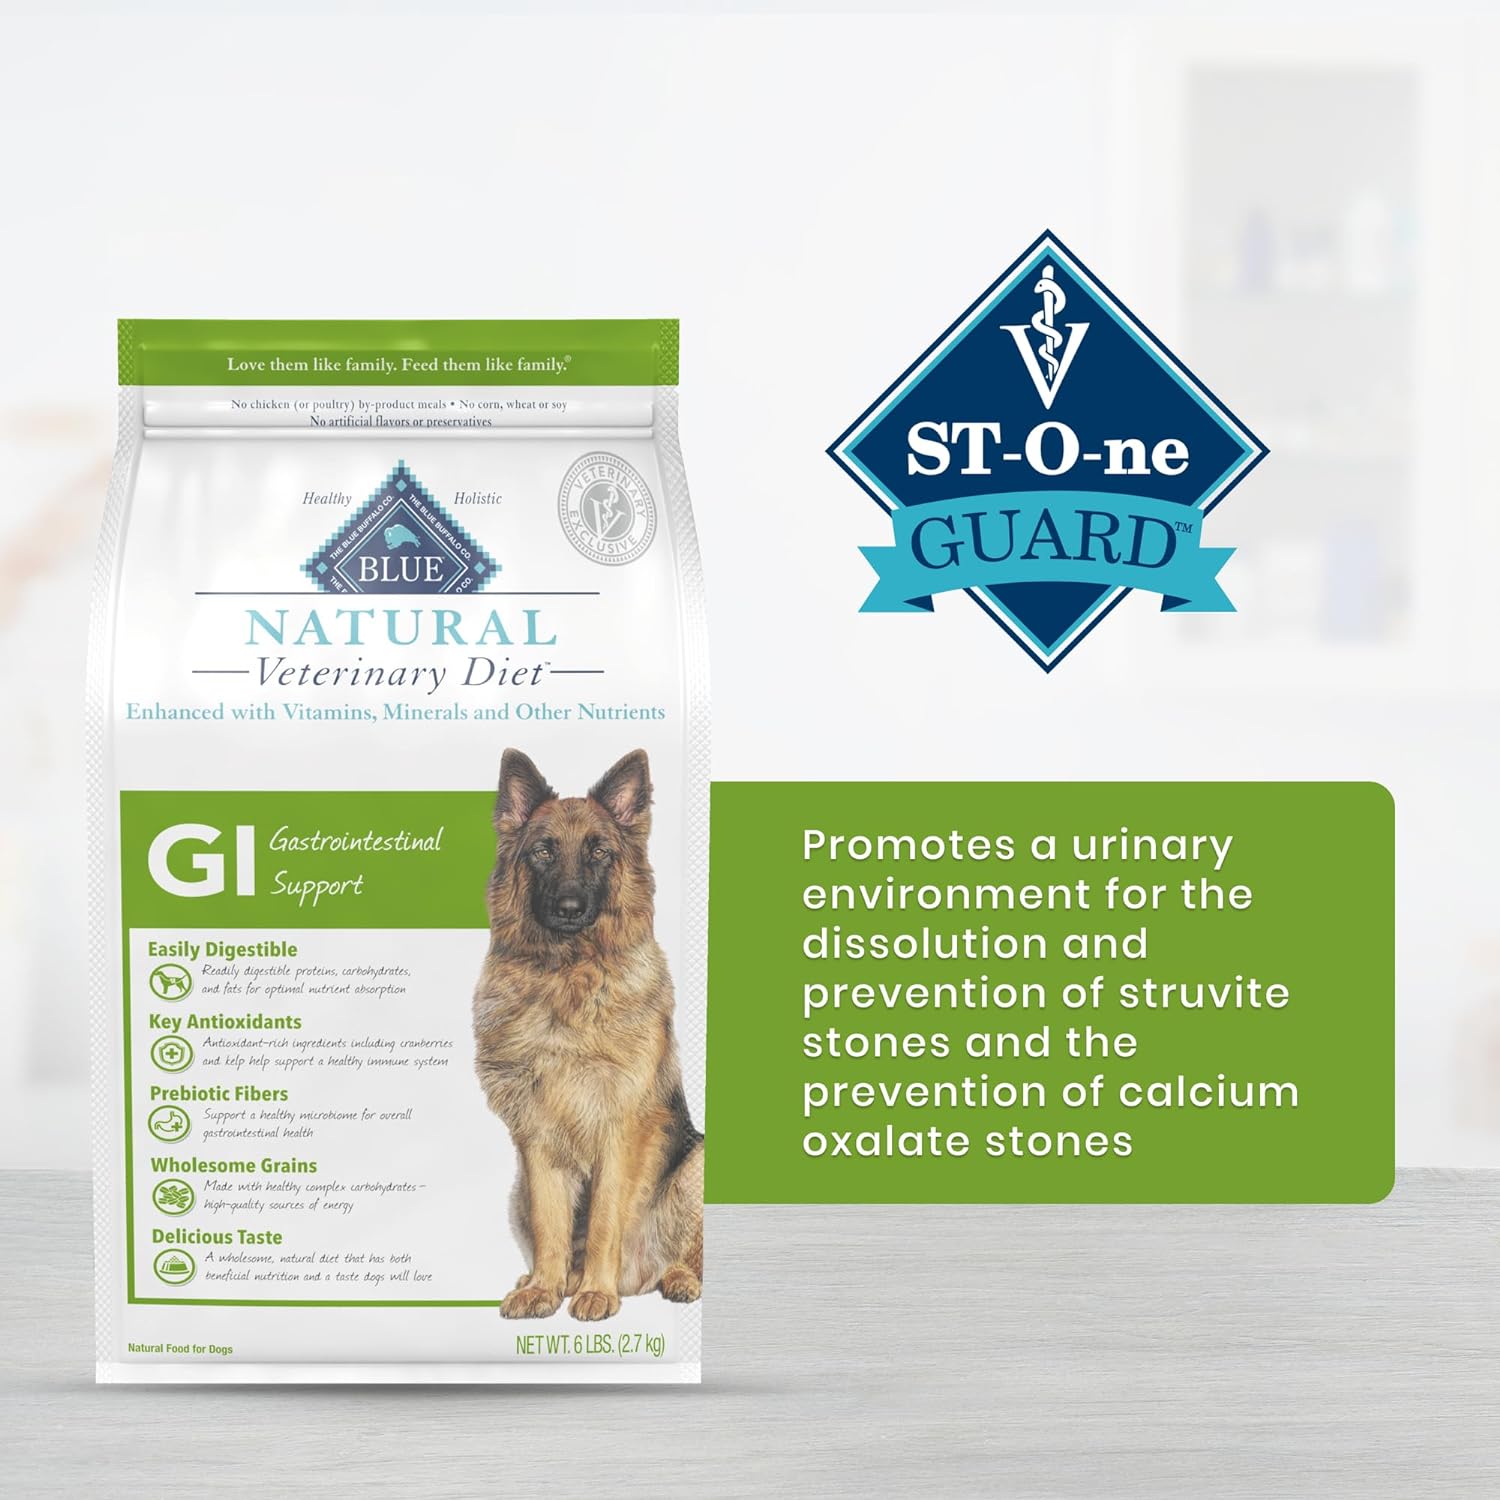 Blue Natural Veterinary Diet GI Gastrointestinal Support Dry Dog Food – Gallery Image 5